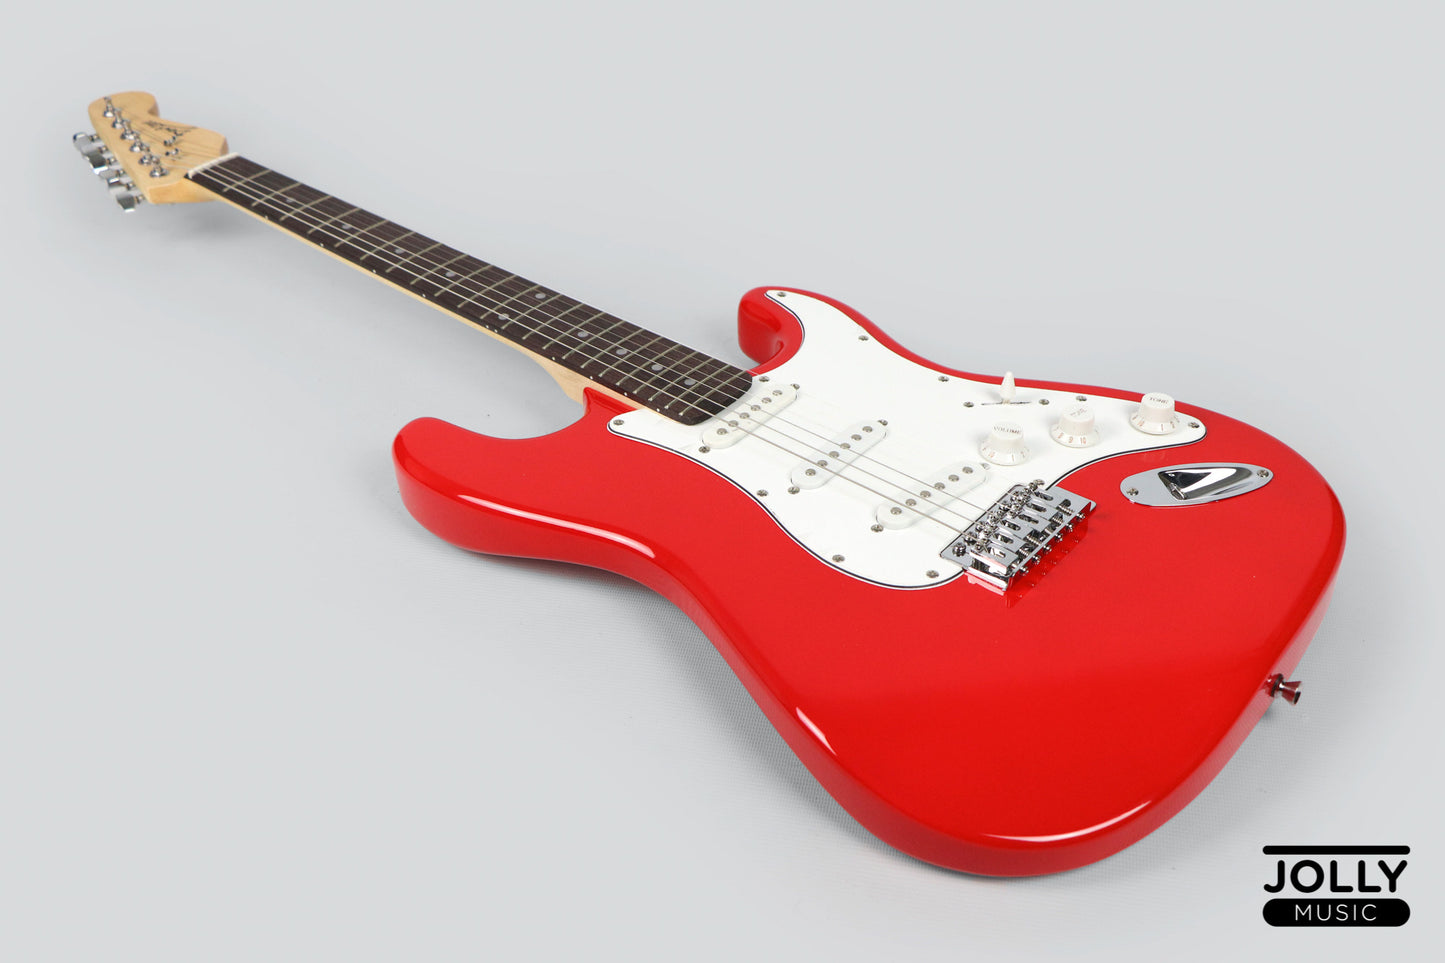 Deviser S-Style L-G1 Electric Guitar - Red – Jolly Music